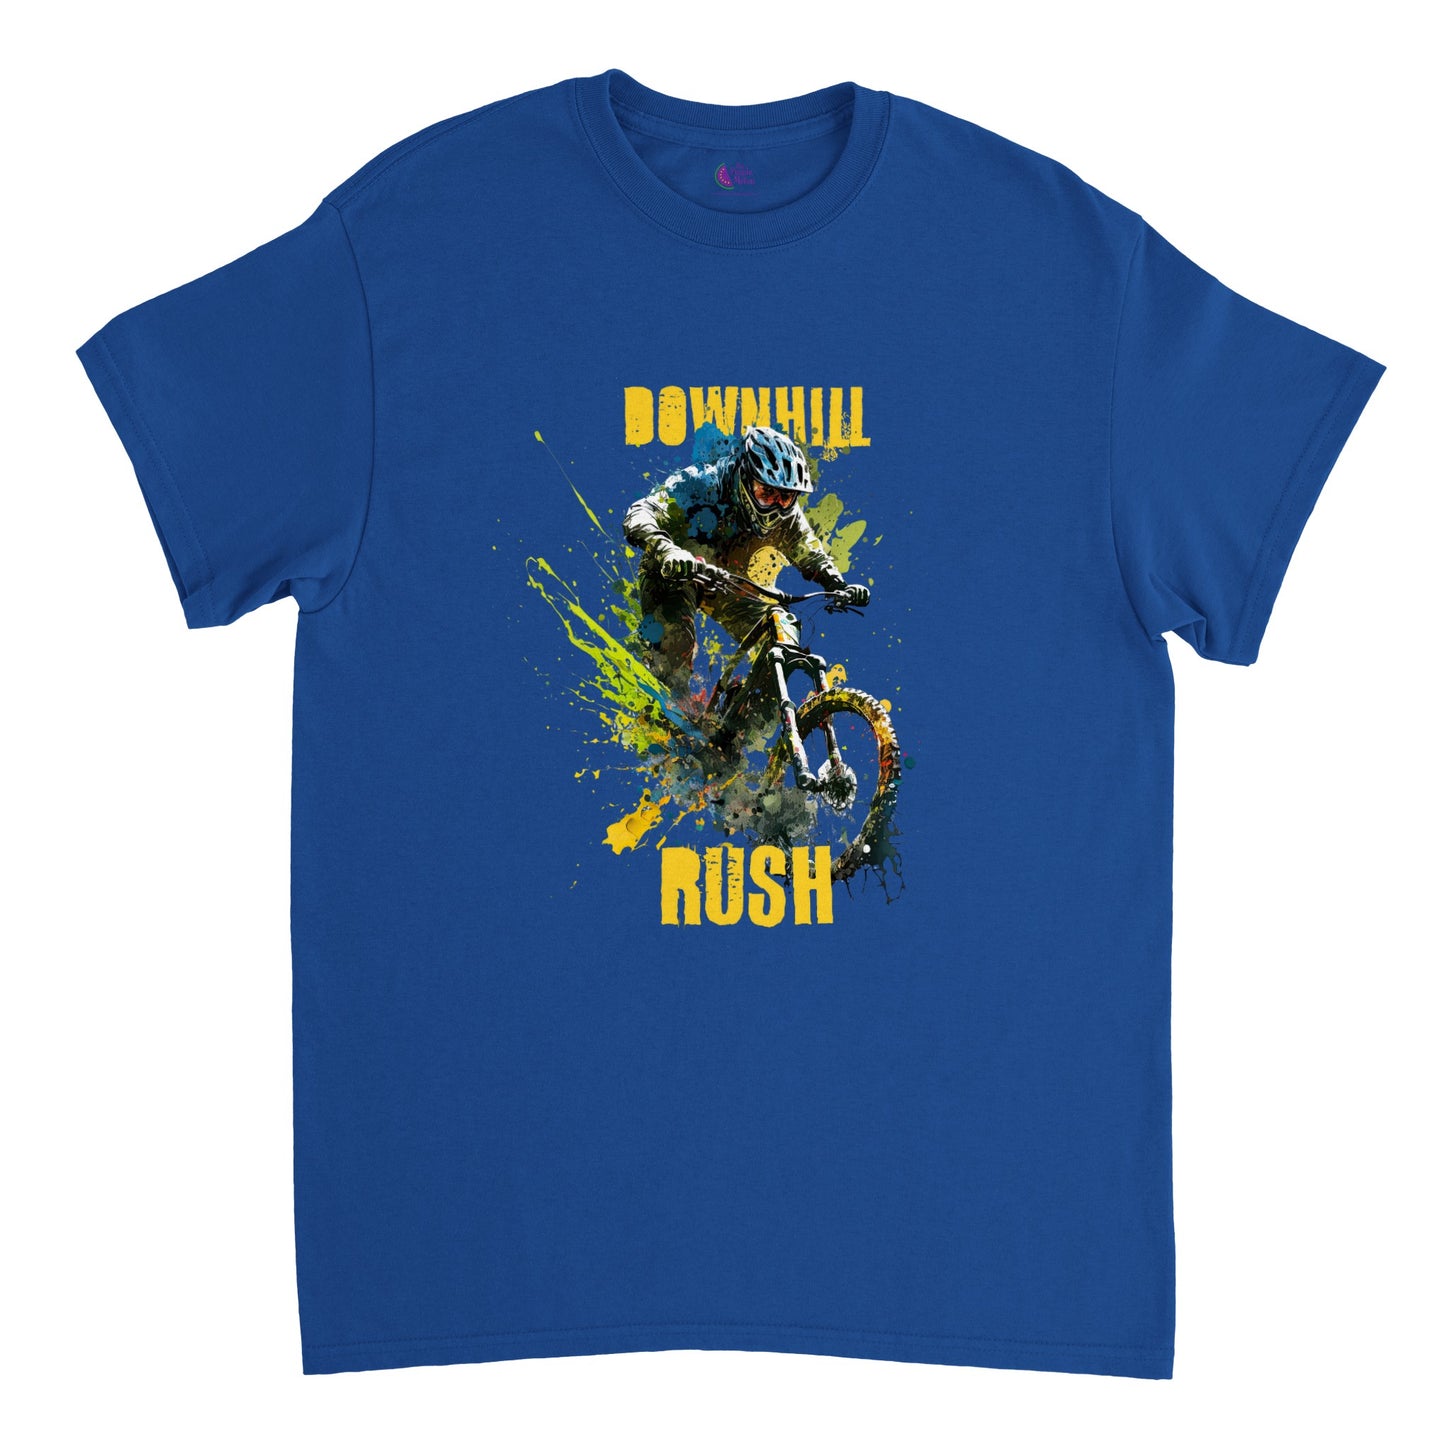 Royal blue t-shirt with a downhill mountain biker print and the caption Downhill Rush